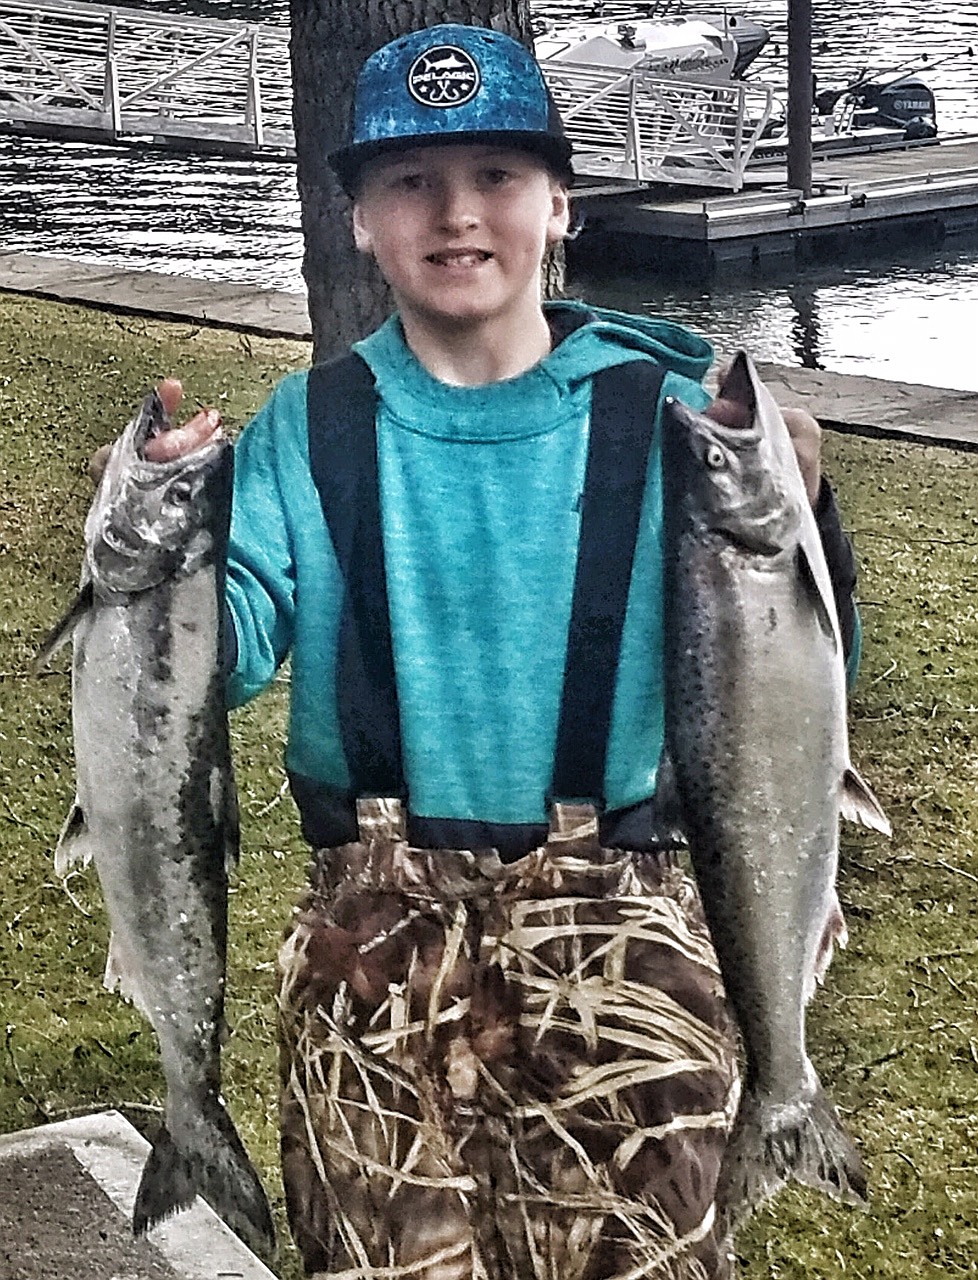 Drake Thompson, 11, of Hayden won the youth first place award for a 4 1/2 pound chinook. The derby was sponsored by Fins and Feathers Tackle Shop and Guide Service in Coeur d'Alene.